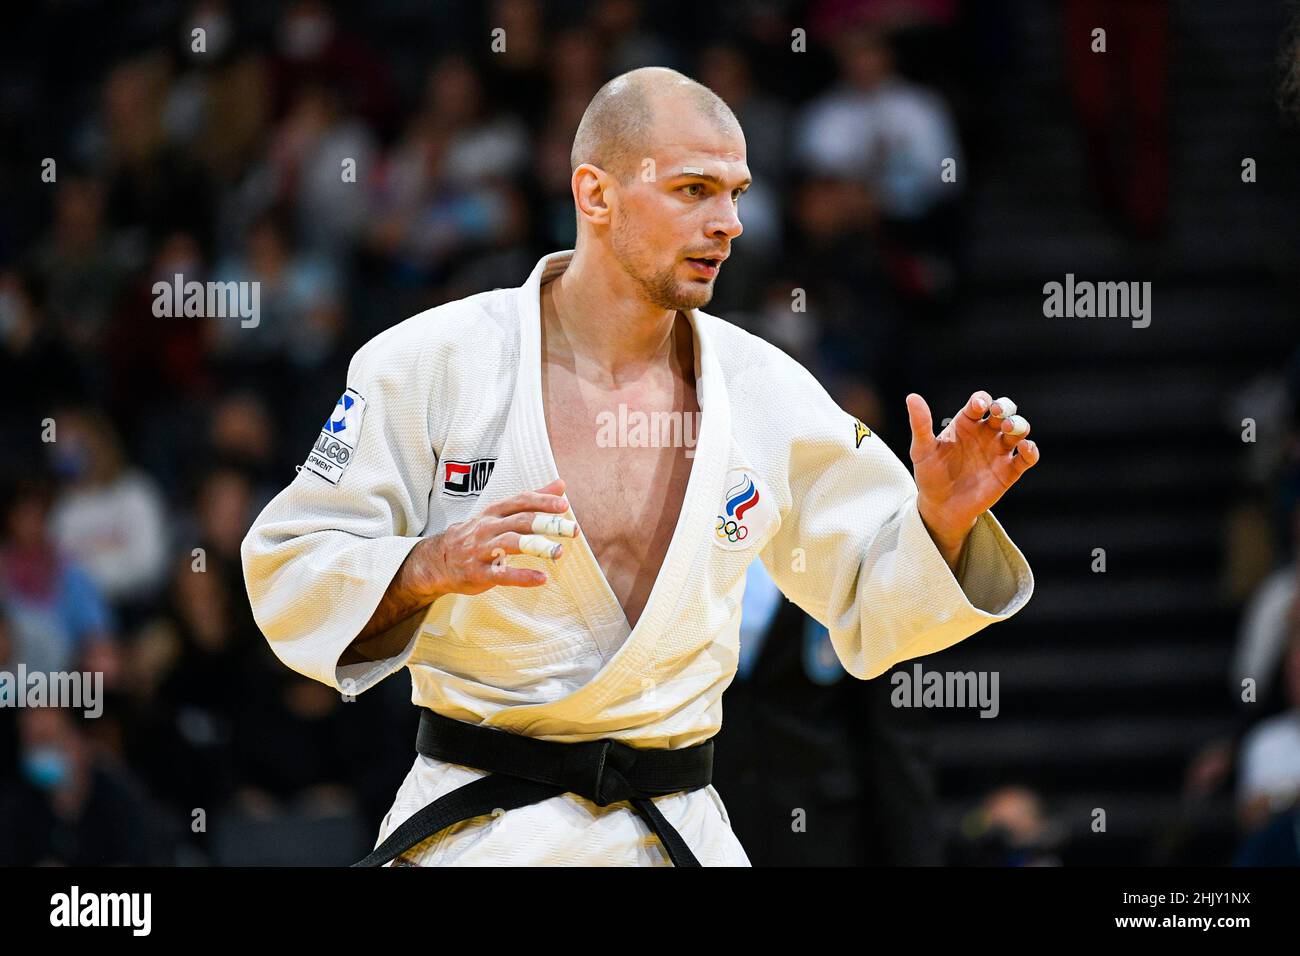 Men -73 kg, Denis IARTCEV of Russia competes during the Paris Grand Slam 2021, Judo event on October 16, 2021 at AccorHotels Arena in Paris, France - Stock Photo